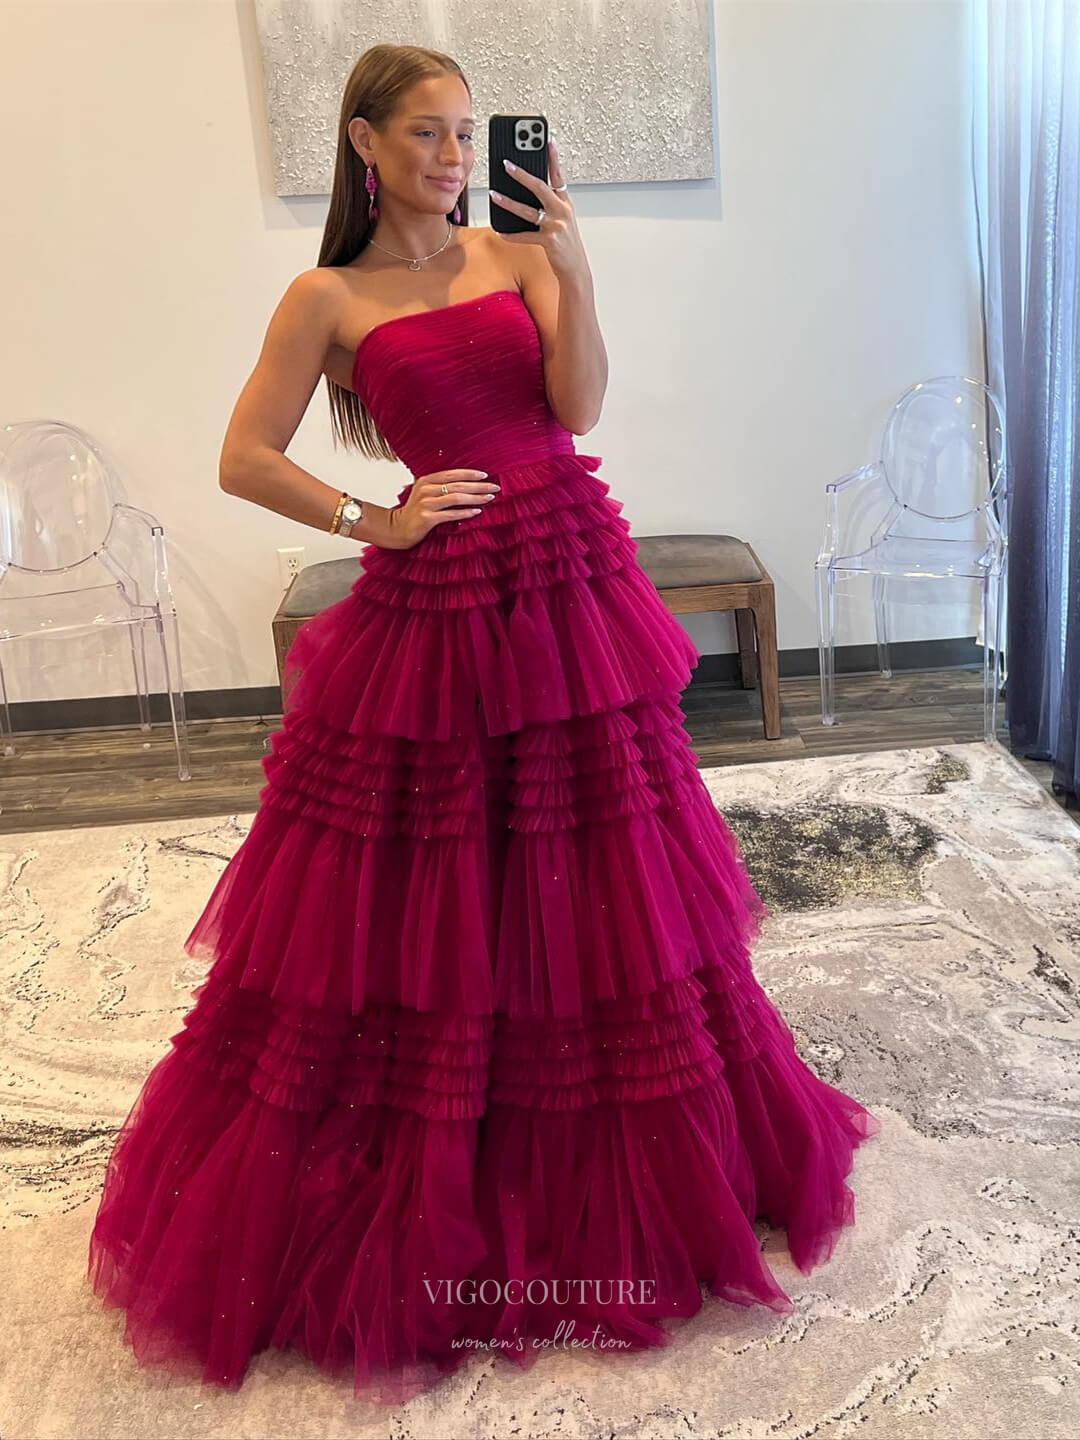 Cathy Strapless Prom Dress With Glove Black Tulle Evening Dress Ball Gown  فستان سهرة Floor Length Party Dress Color custom color US Size 22